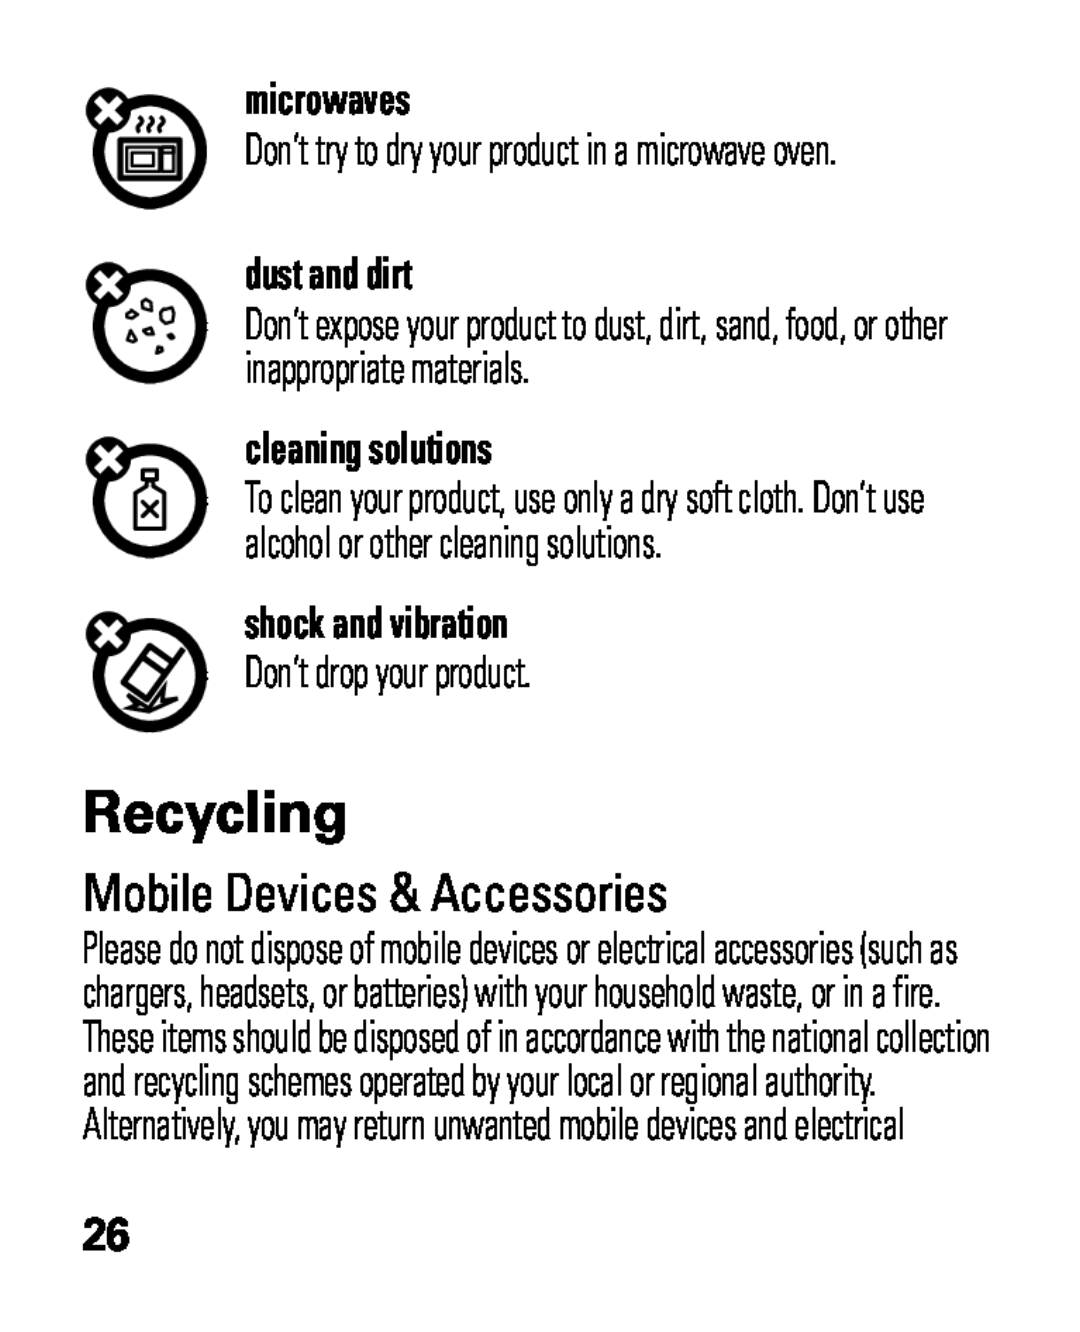 Motorola HK100 Recycling, Mobile Devices & Accessories, microwaves, dust and dirt, cleaning solutions, shock and vibration 